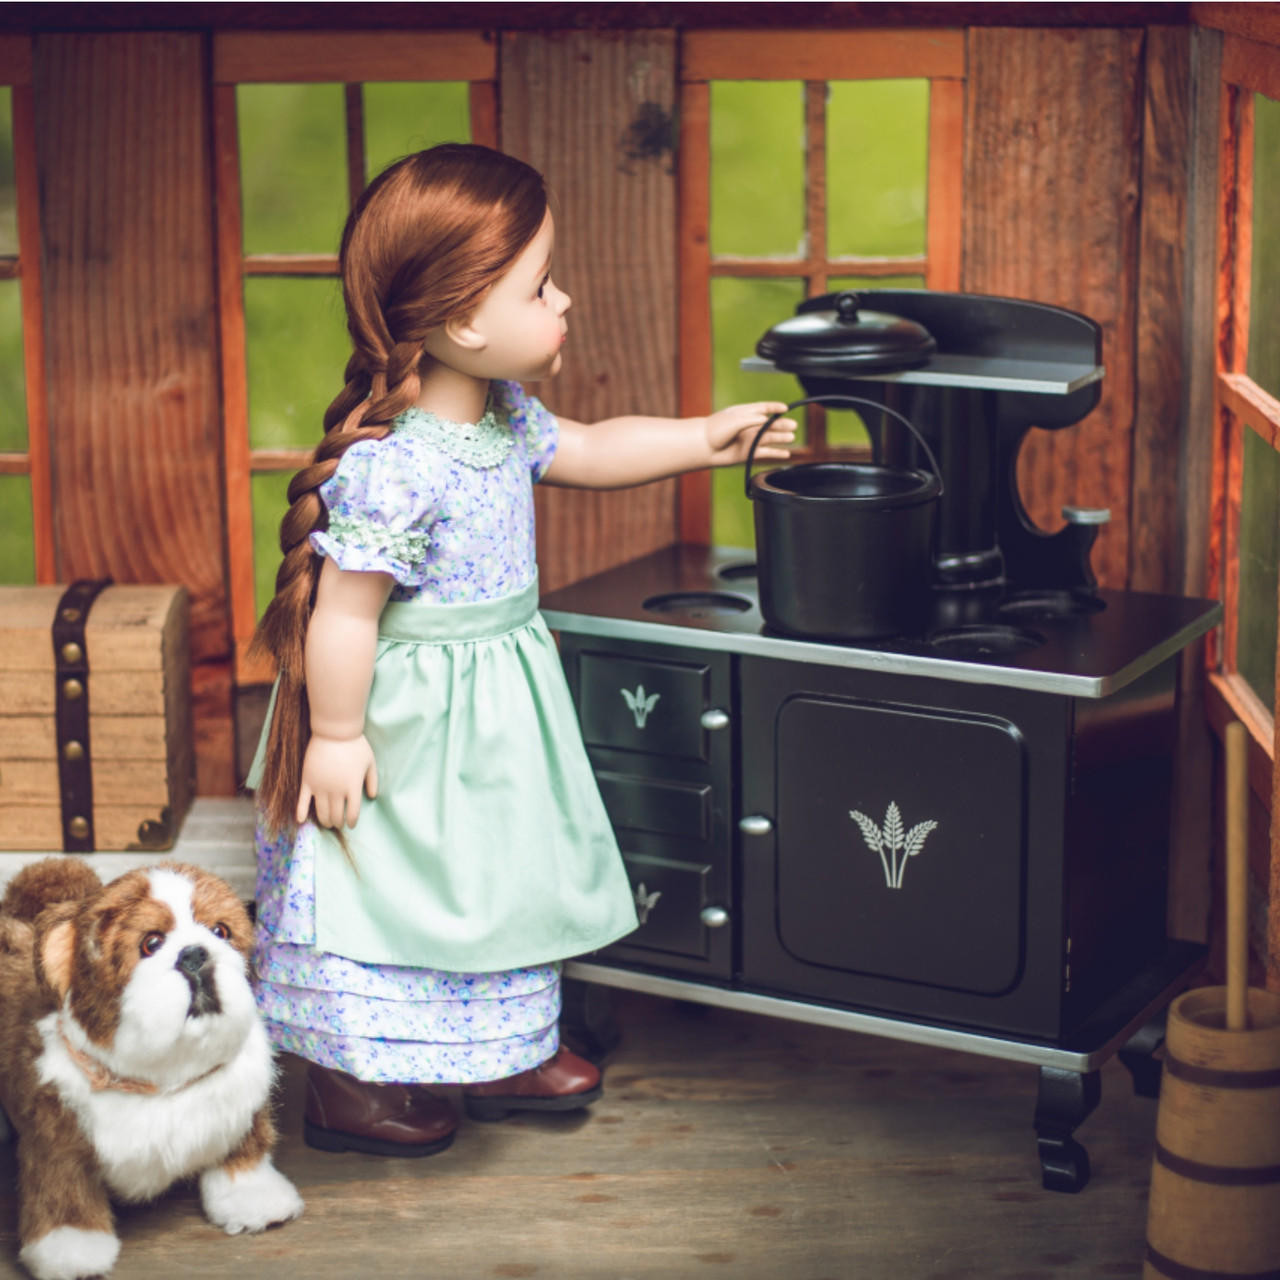 https://cdn11.bigcommerce.com/s-m5vcu70215/images/stencil/1280w/products/198/2539/the-queens-treasures-little-house-on-the-prairie-wood-cook-stove-furniture-for-18-inch-dolls__67129.1695644897.jpg